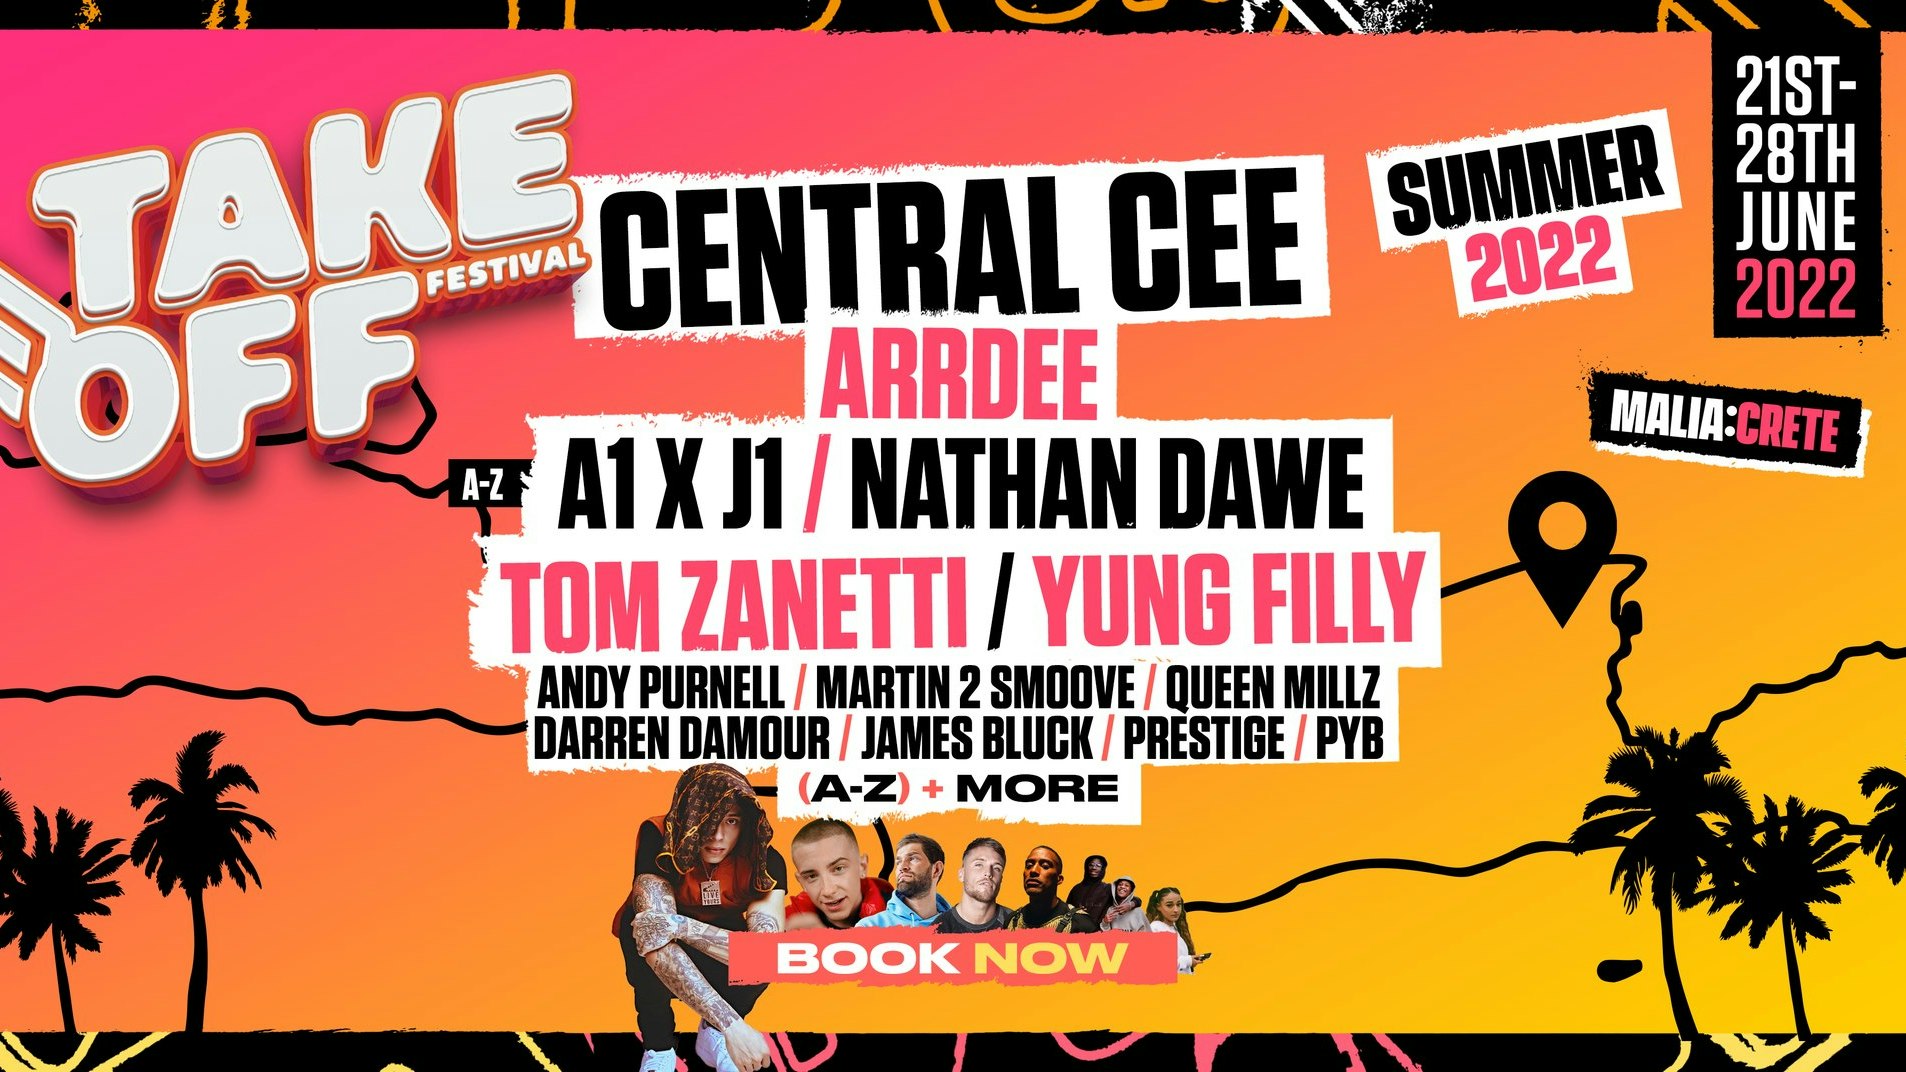 Take Off Festival 2022  ✈️  – Malia, Crete  |  ft Central Cee, Arrdee, Yung Filly, Nathan Dawe & More!